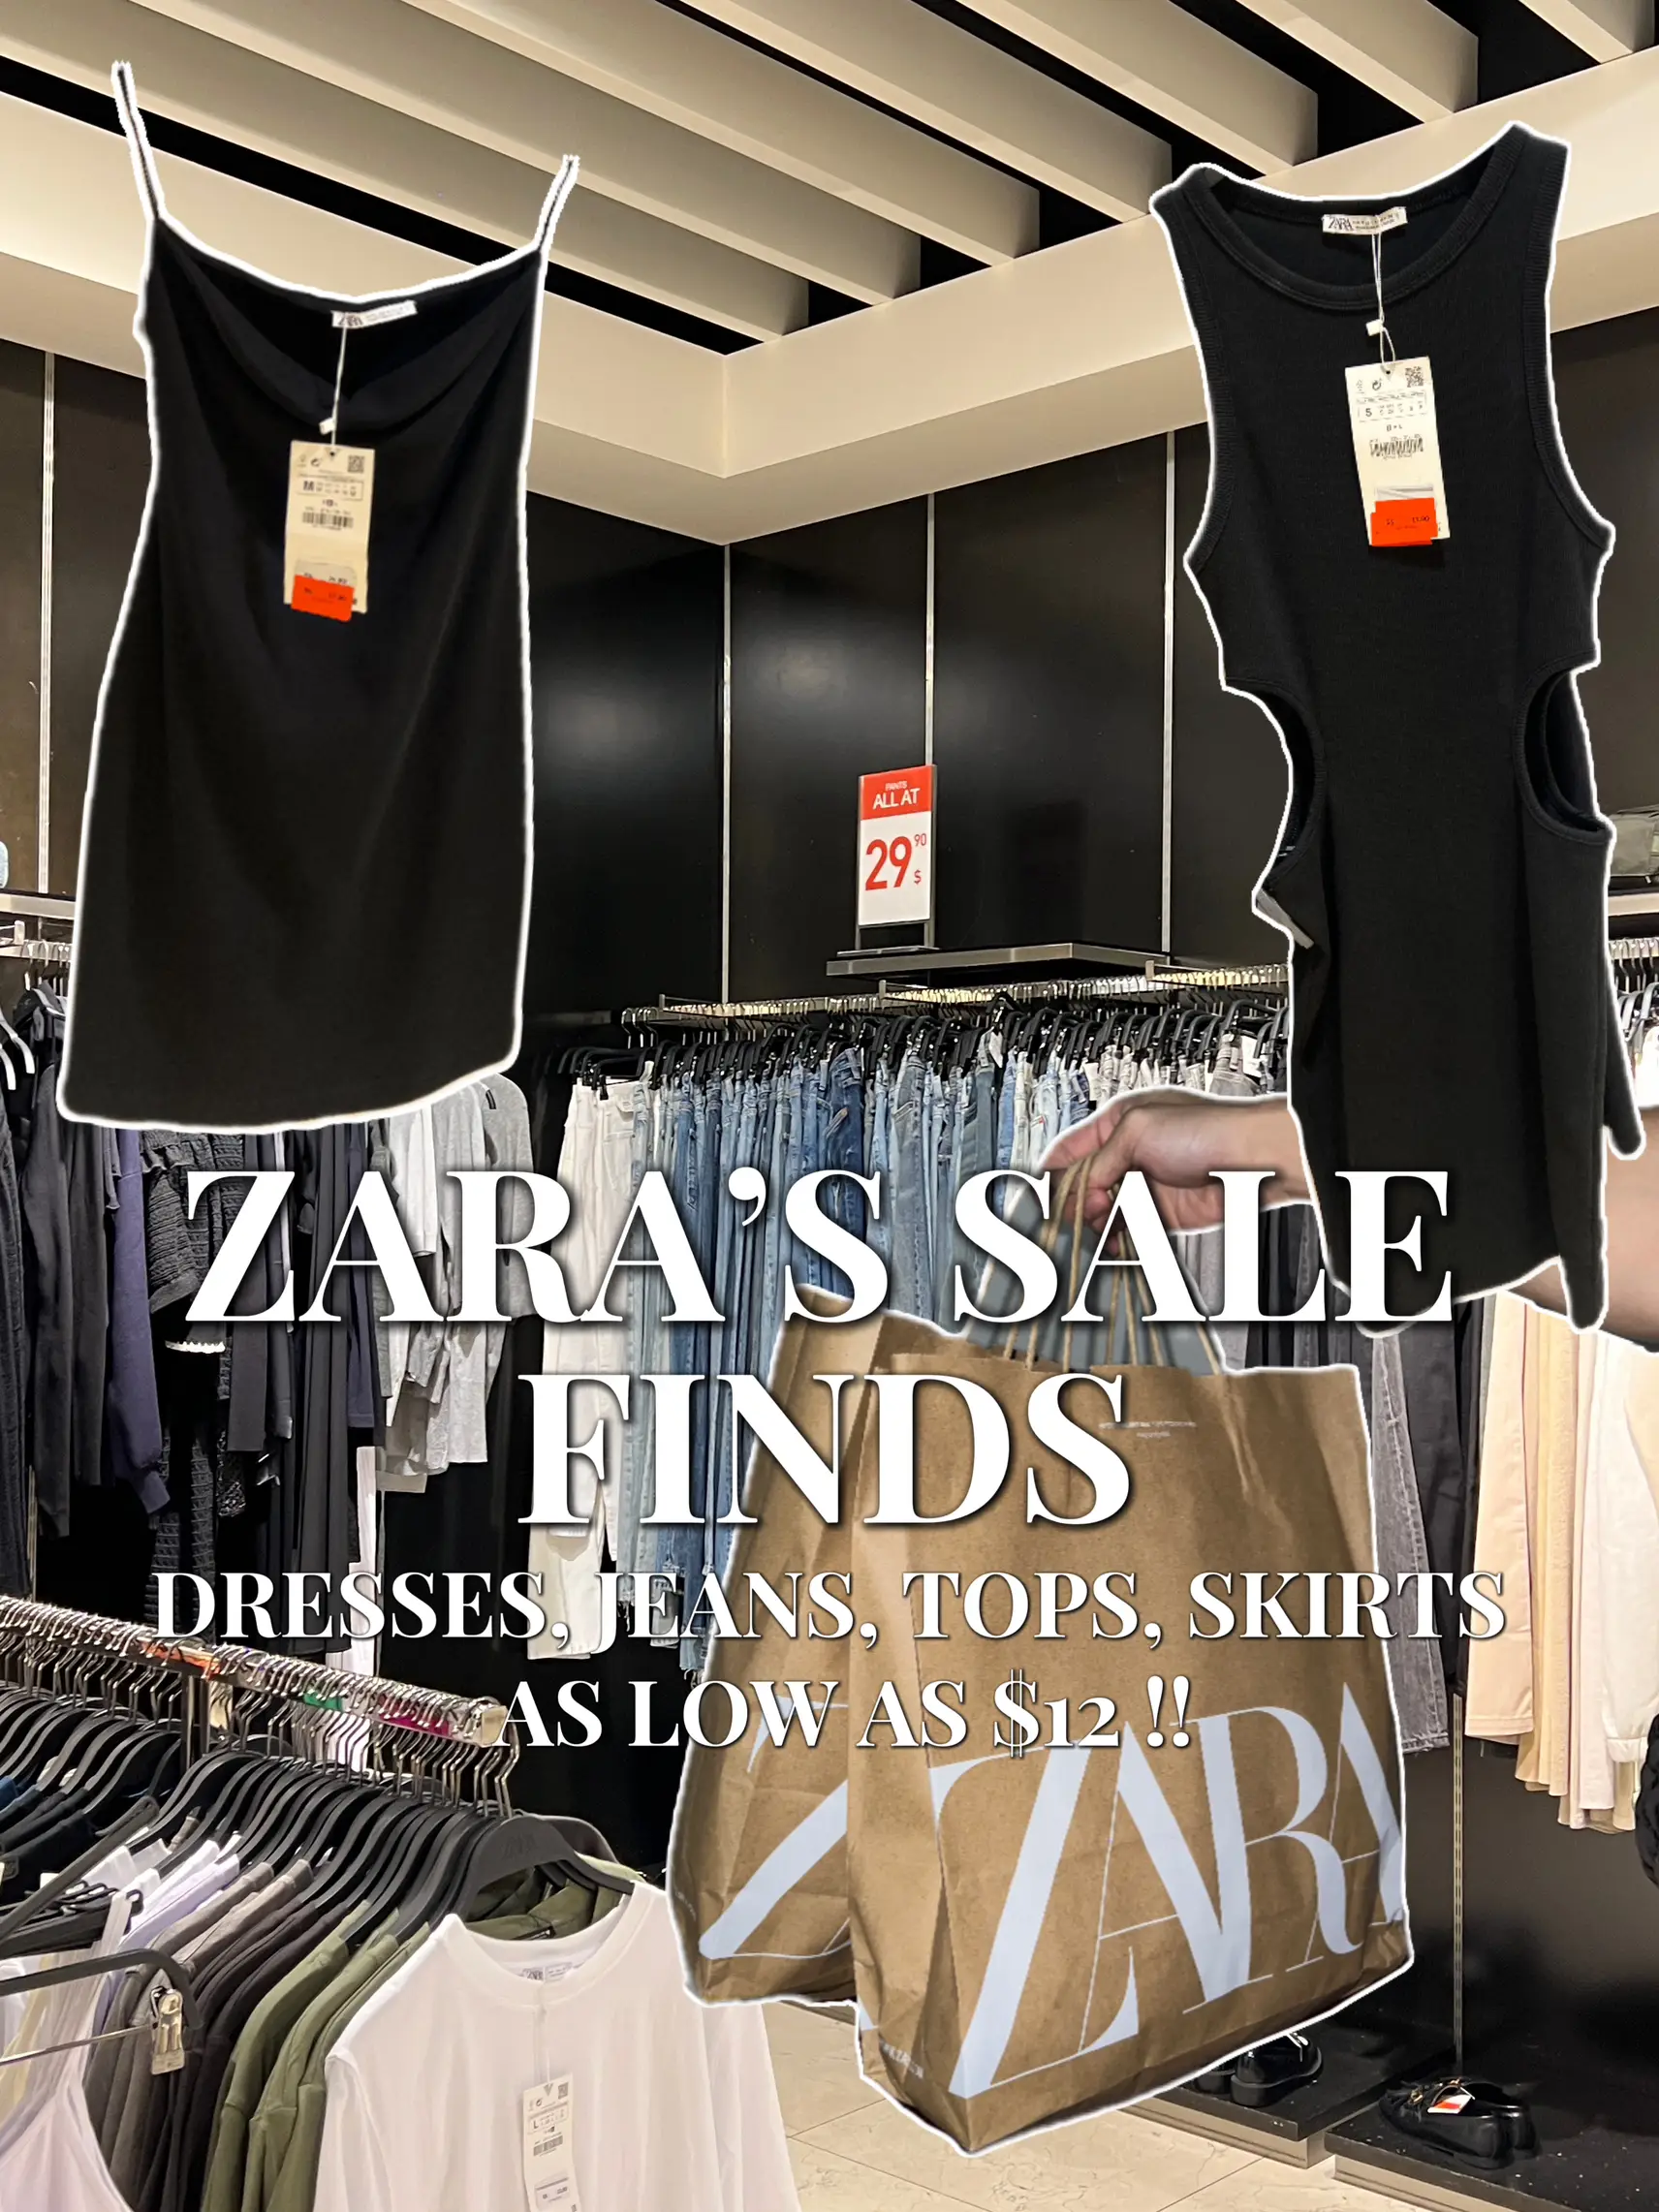 Seamless Tops, Glassons, Shop New In Store Outlet For Womens